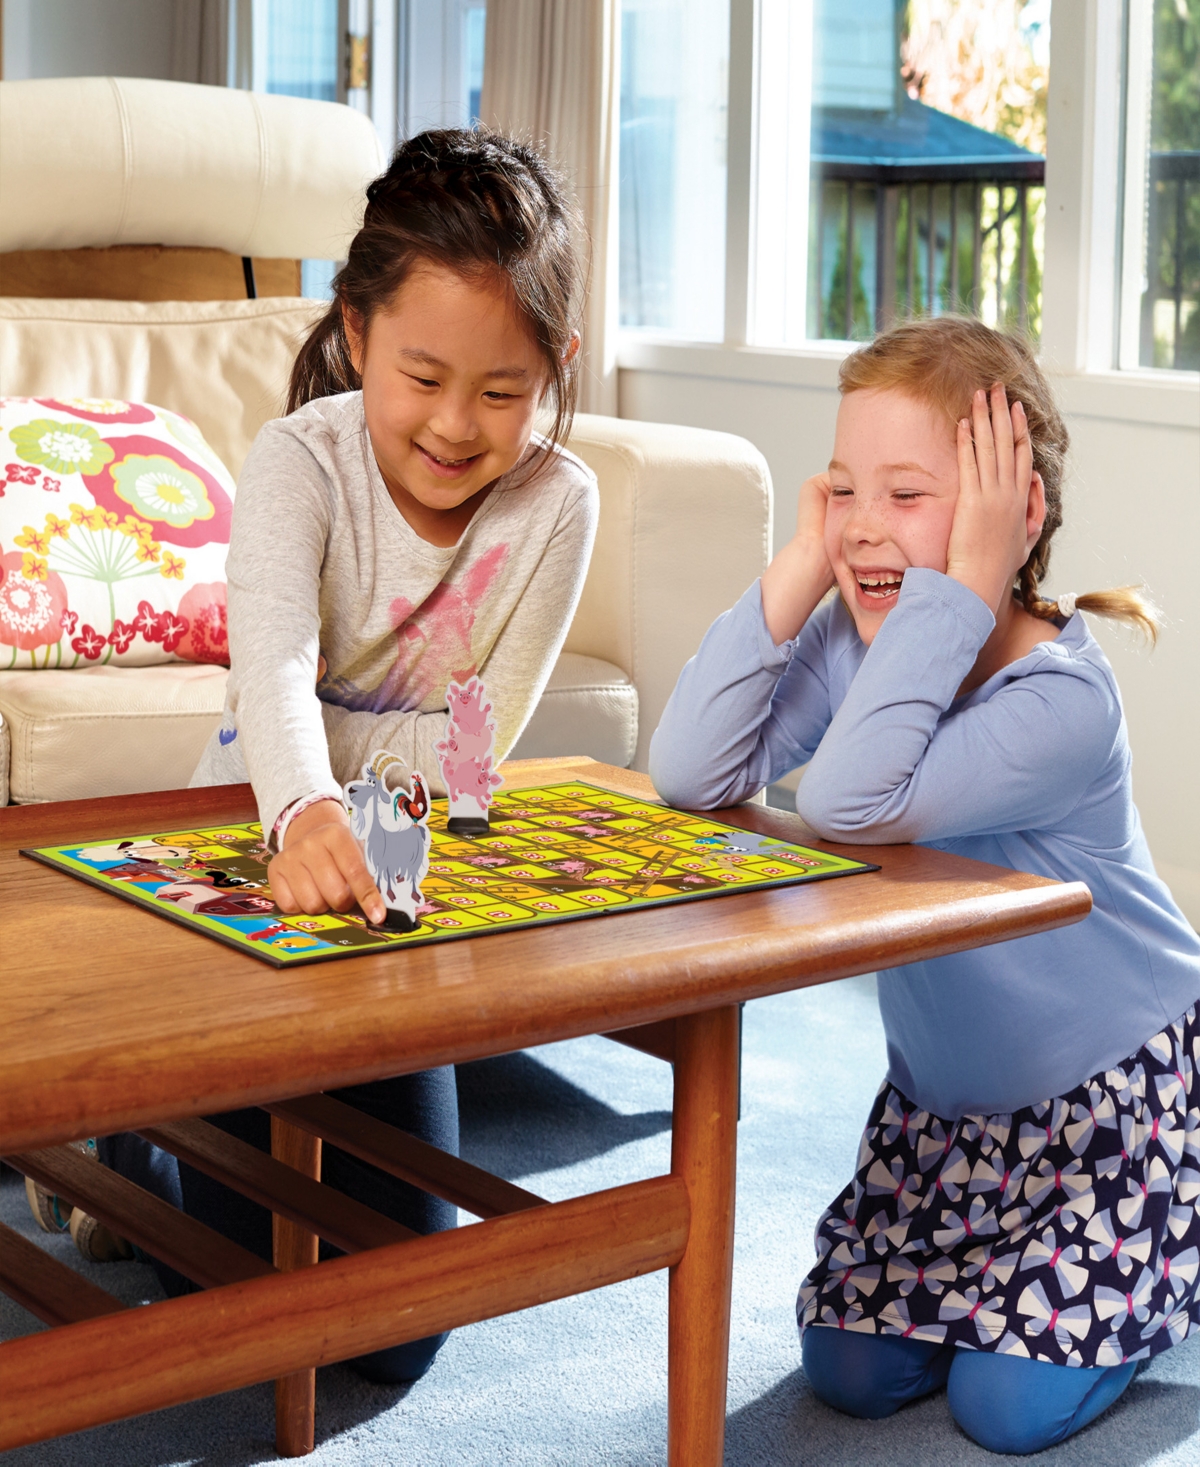 Shop Outset Media Farm Snakes And Ladders No Reading Required, Preschool Kids Board Game, Builds Children's Social Dev In Multi